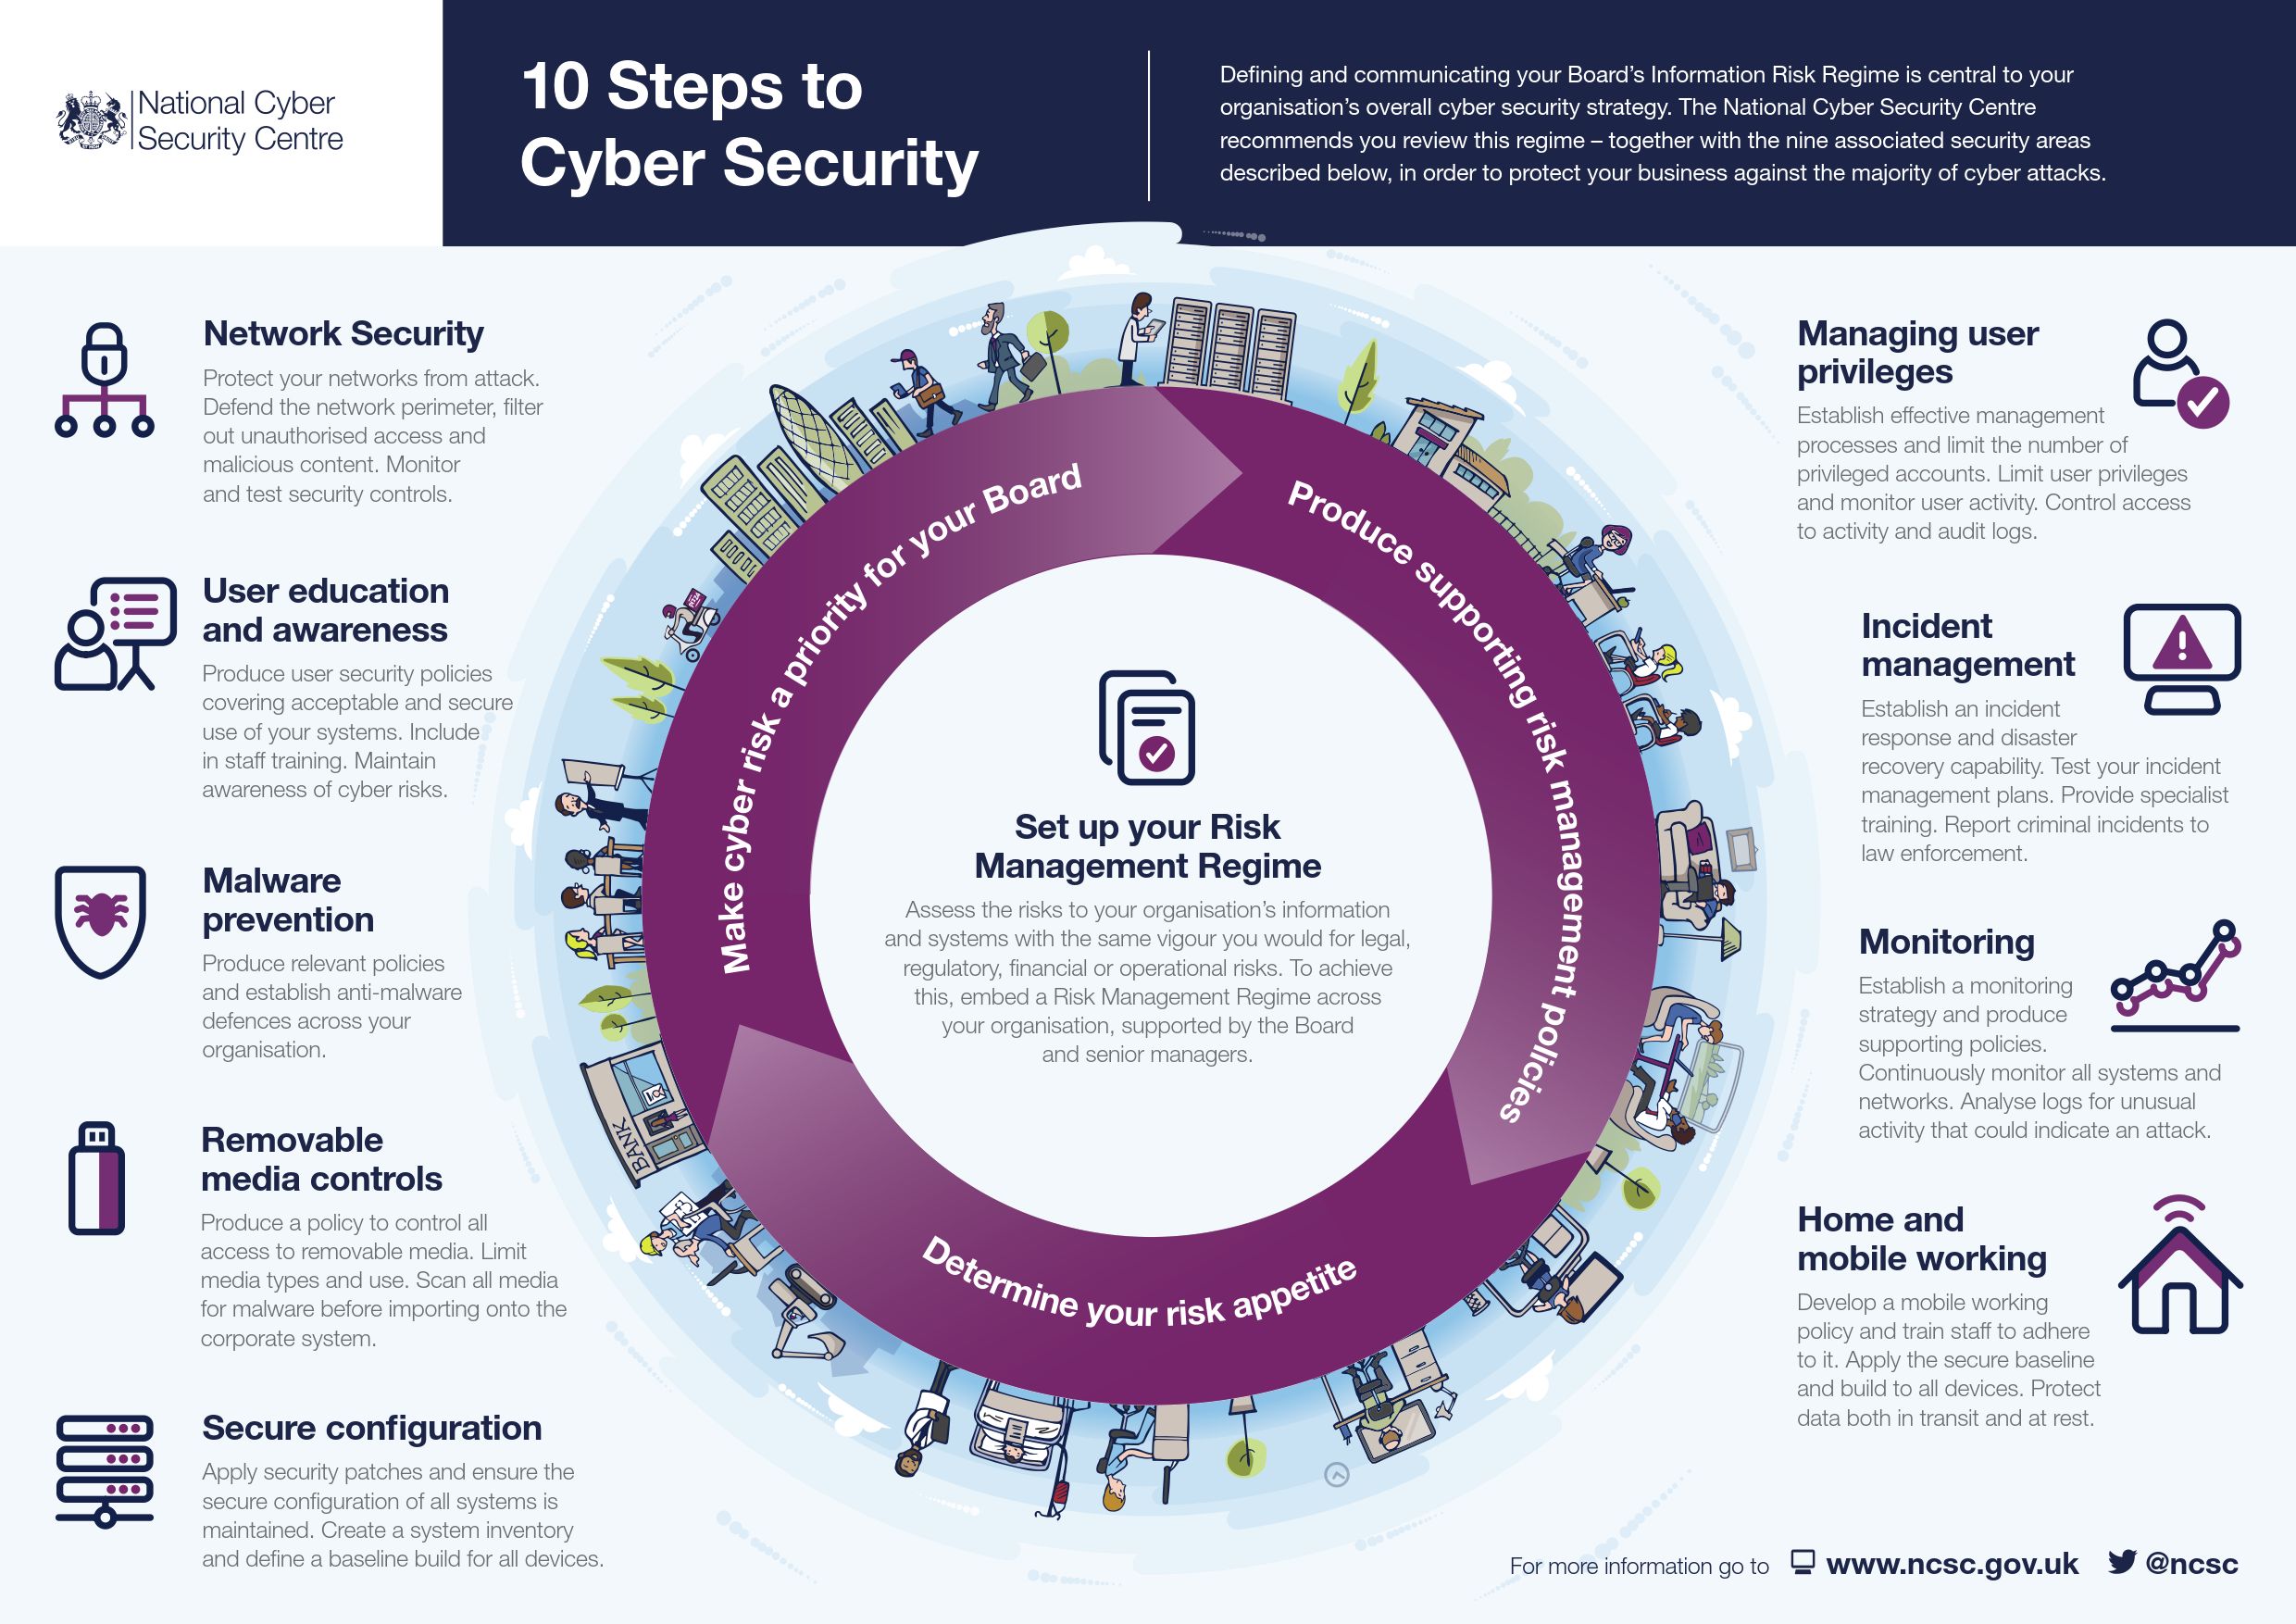 NCSC 10 Steps to Cyber Security